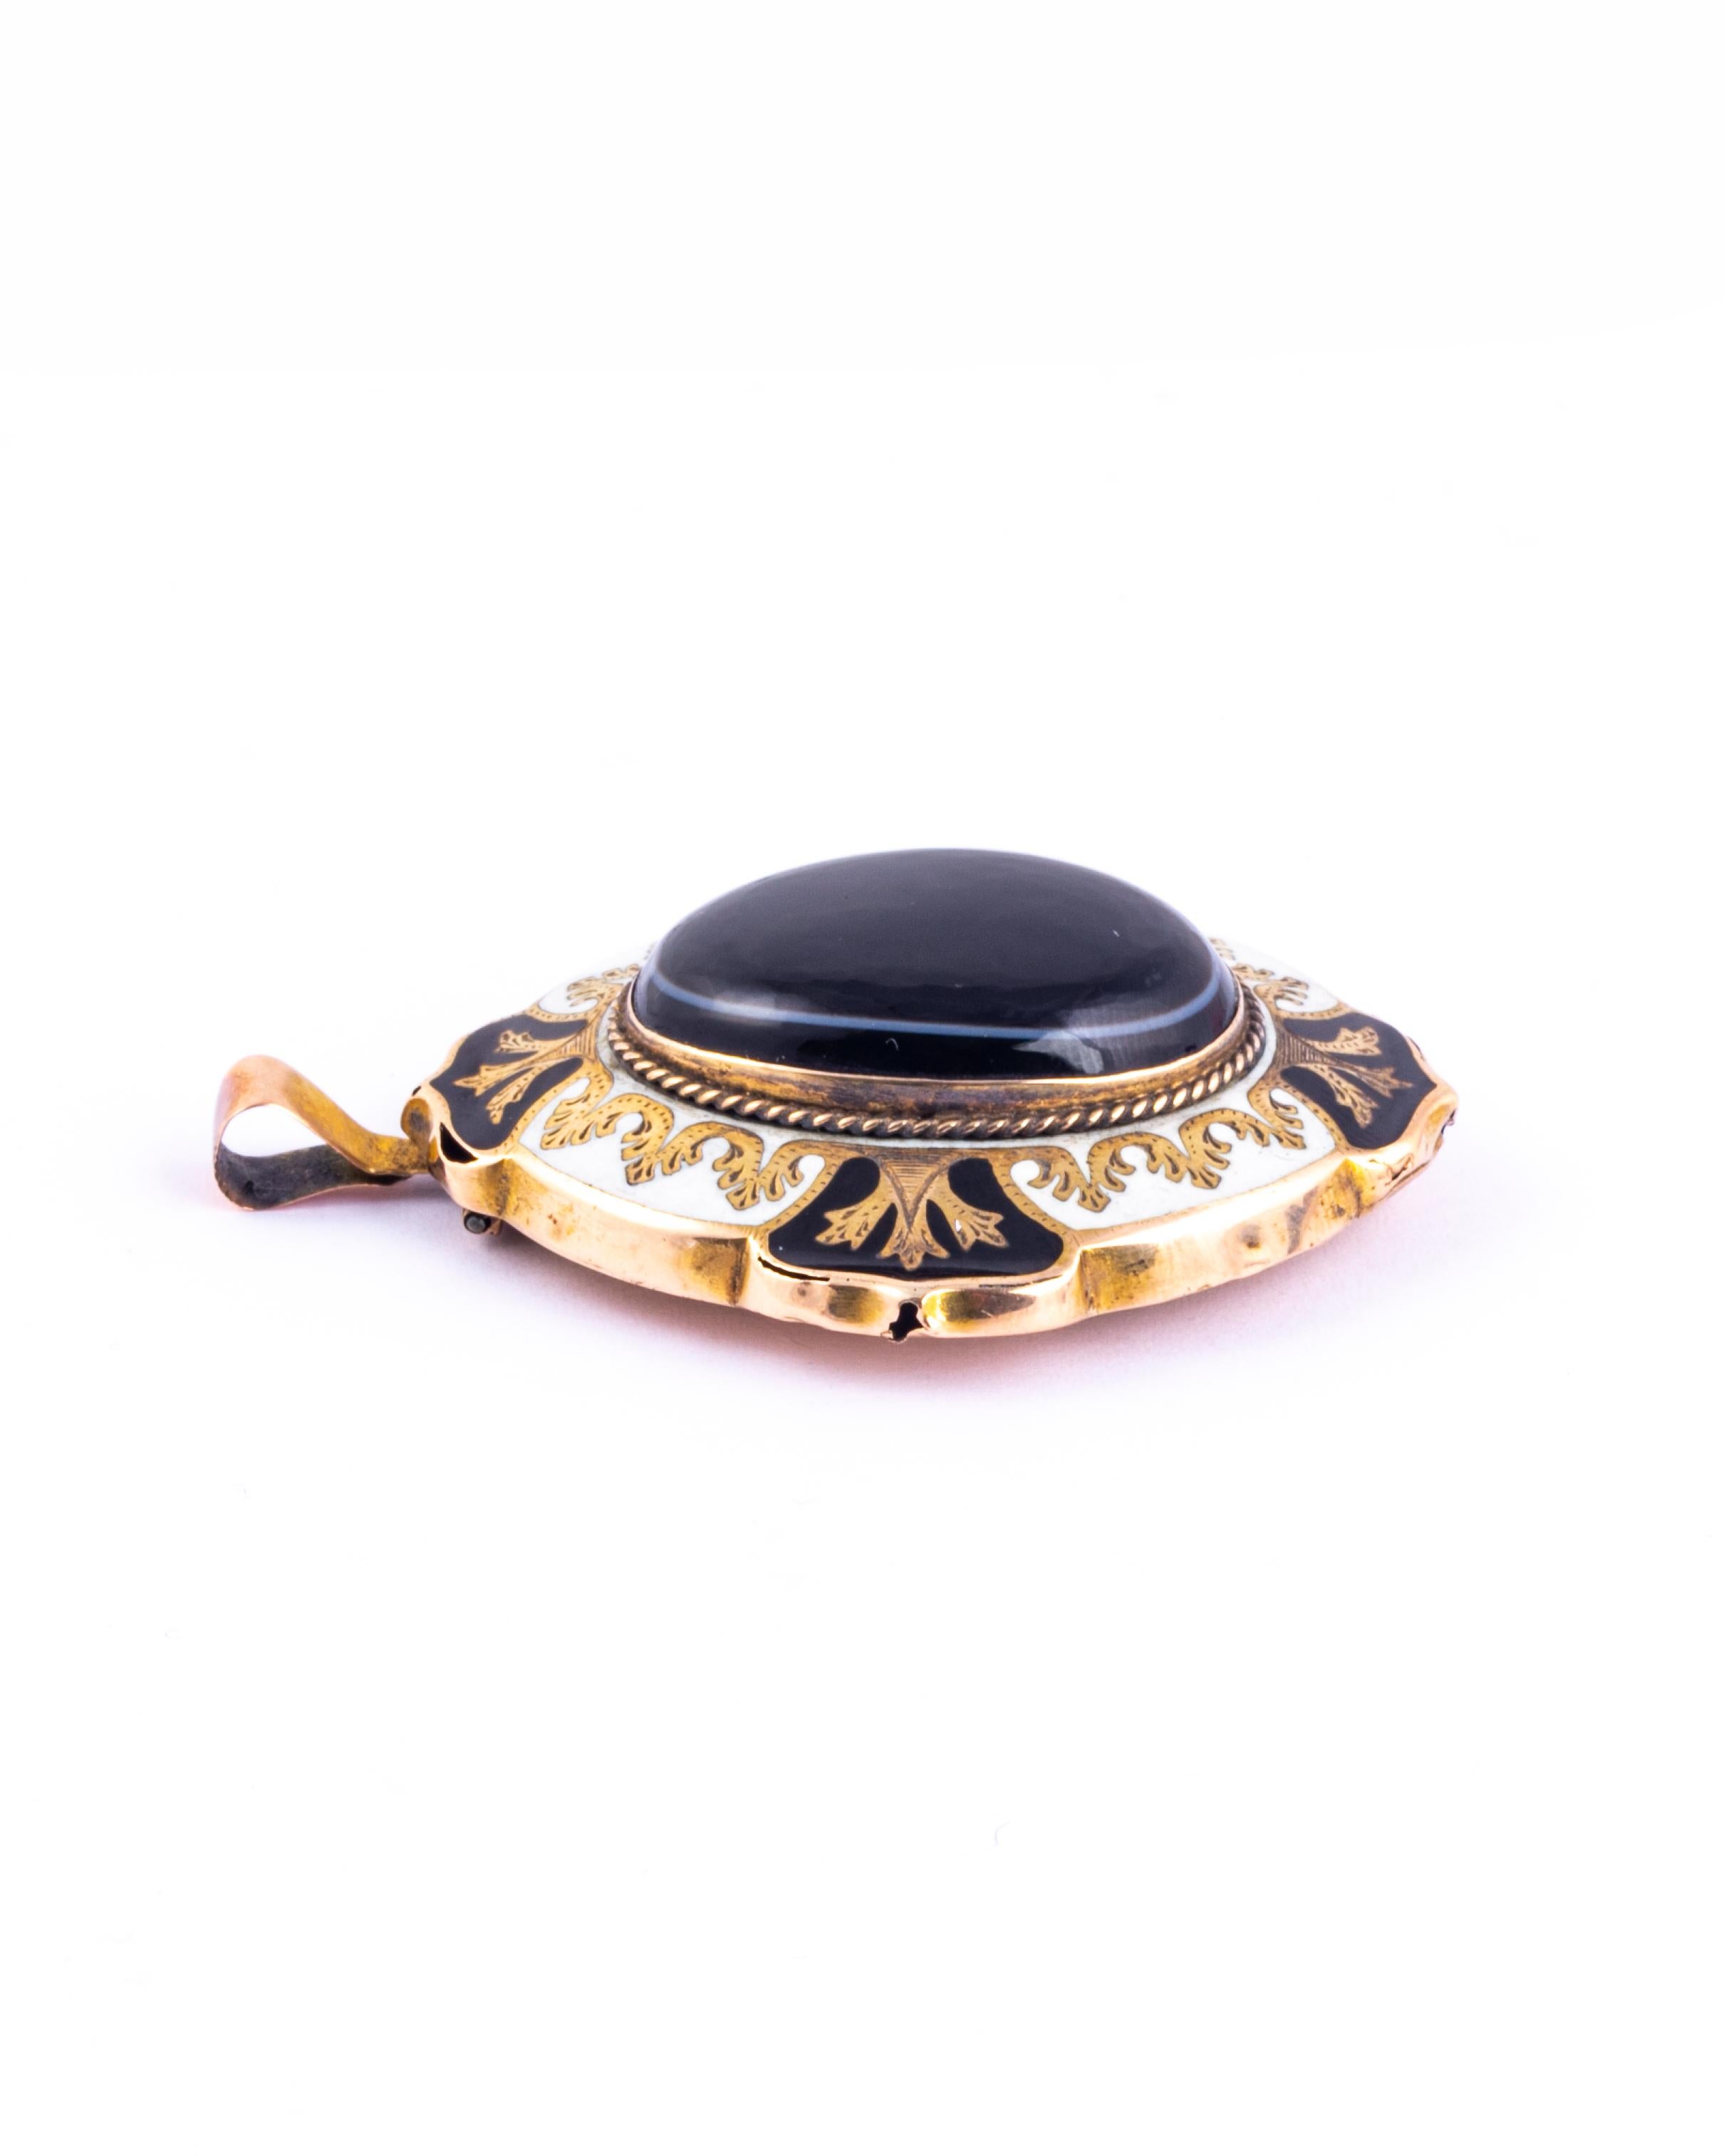 This wonderfully ornate locket holds a large glossy banded agate at the centre. Surrounding this stone is black and white enamel with intricate gold detail. Turn over this pendant and there is a locket back with the original glazed panel. modelled